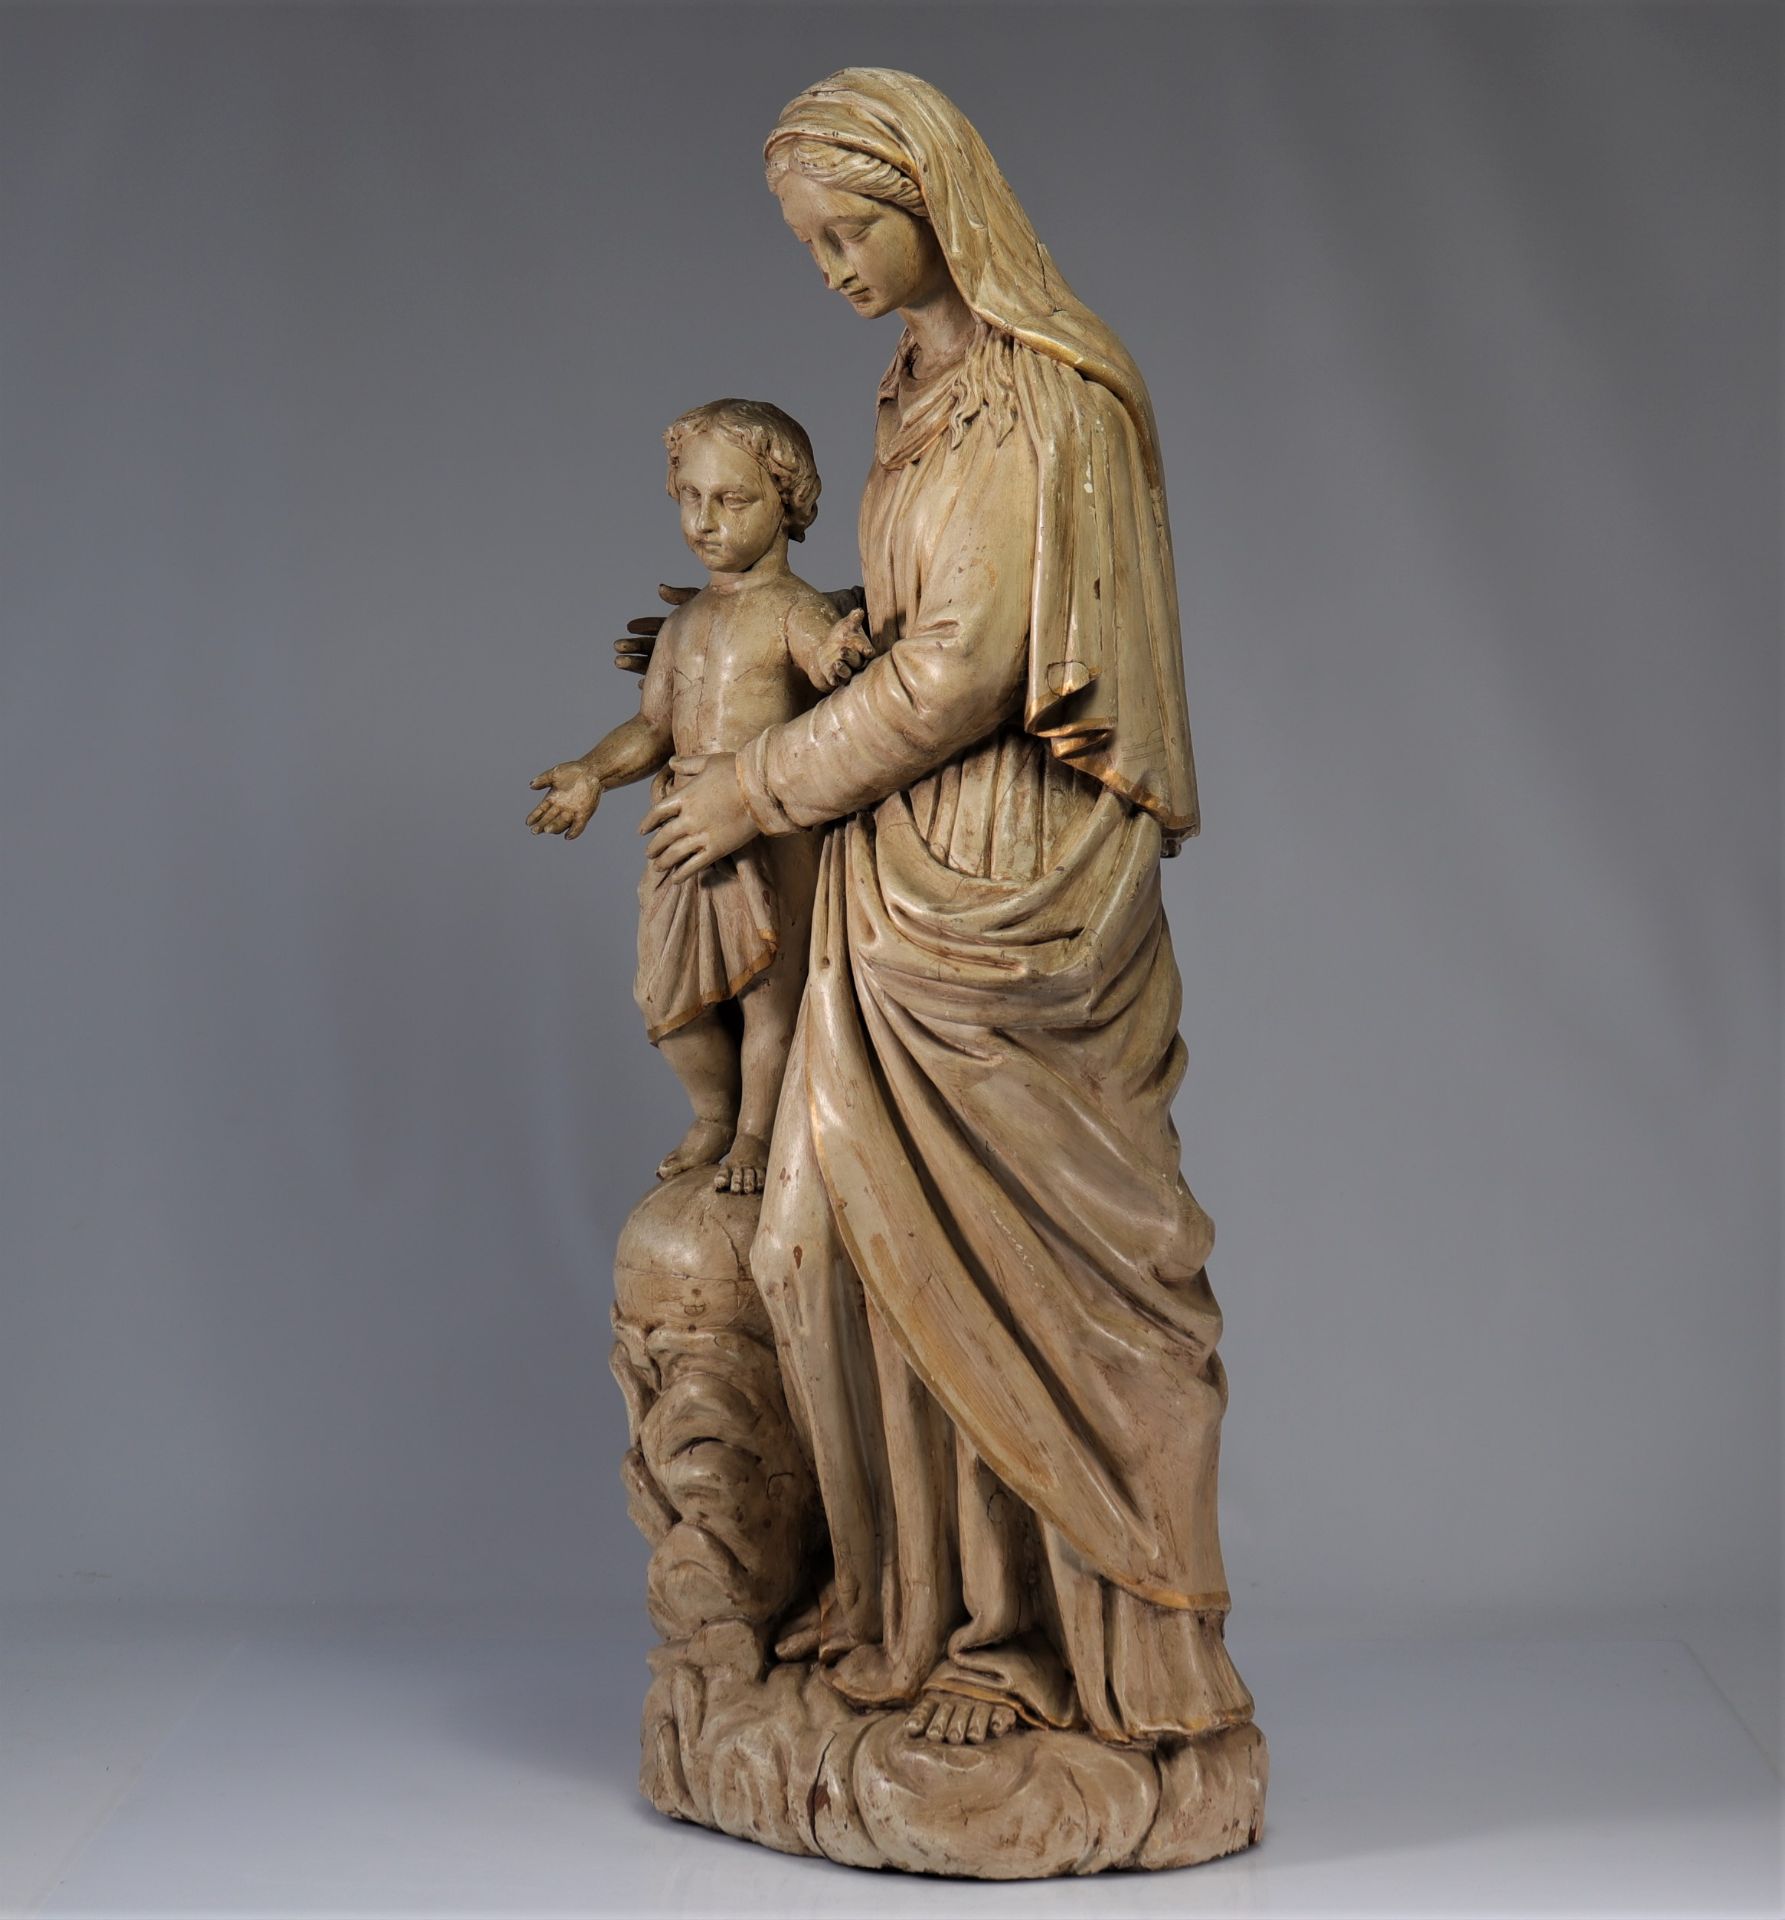 Large wooden sculpture of the Virgin and Child from 17th century - Image 3 of 5